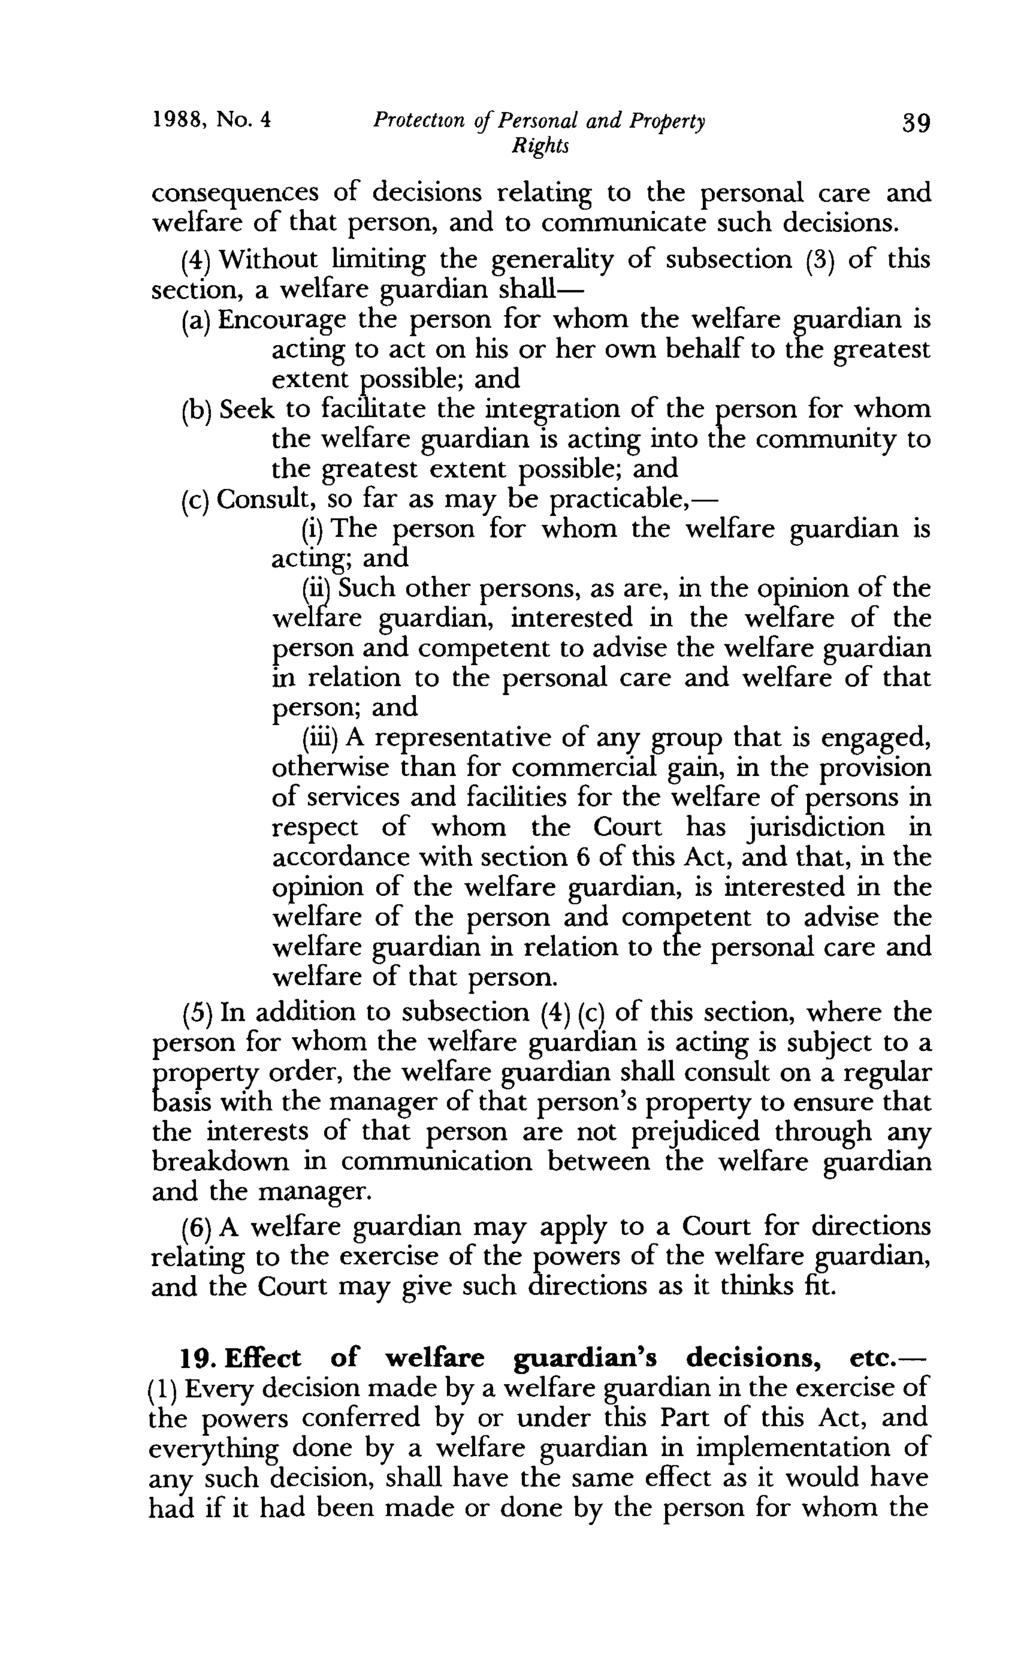 1988, No. 4 Protectzon of Personal and Property consequences of decisions relating to the personal care and welfare of that person, and to communicate such decisions.